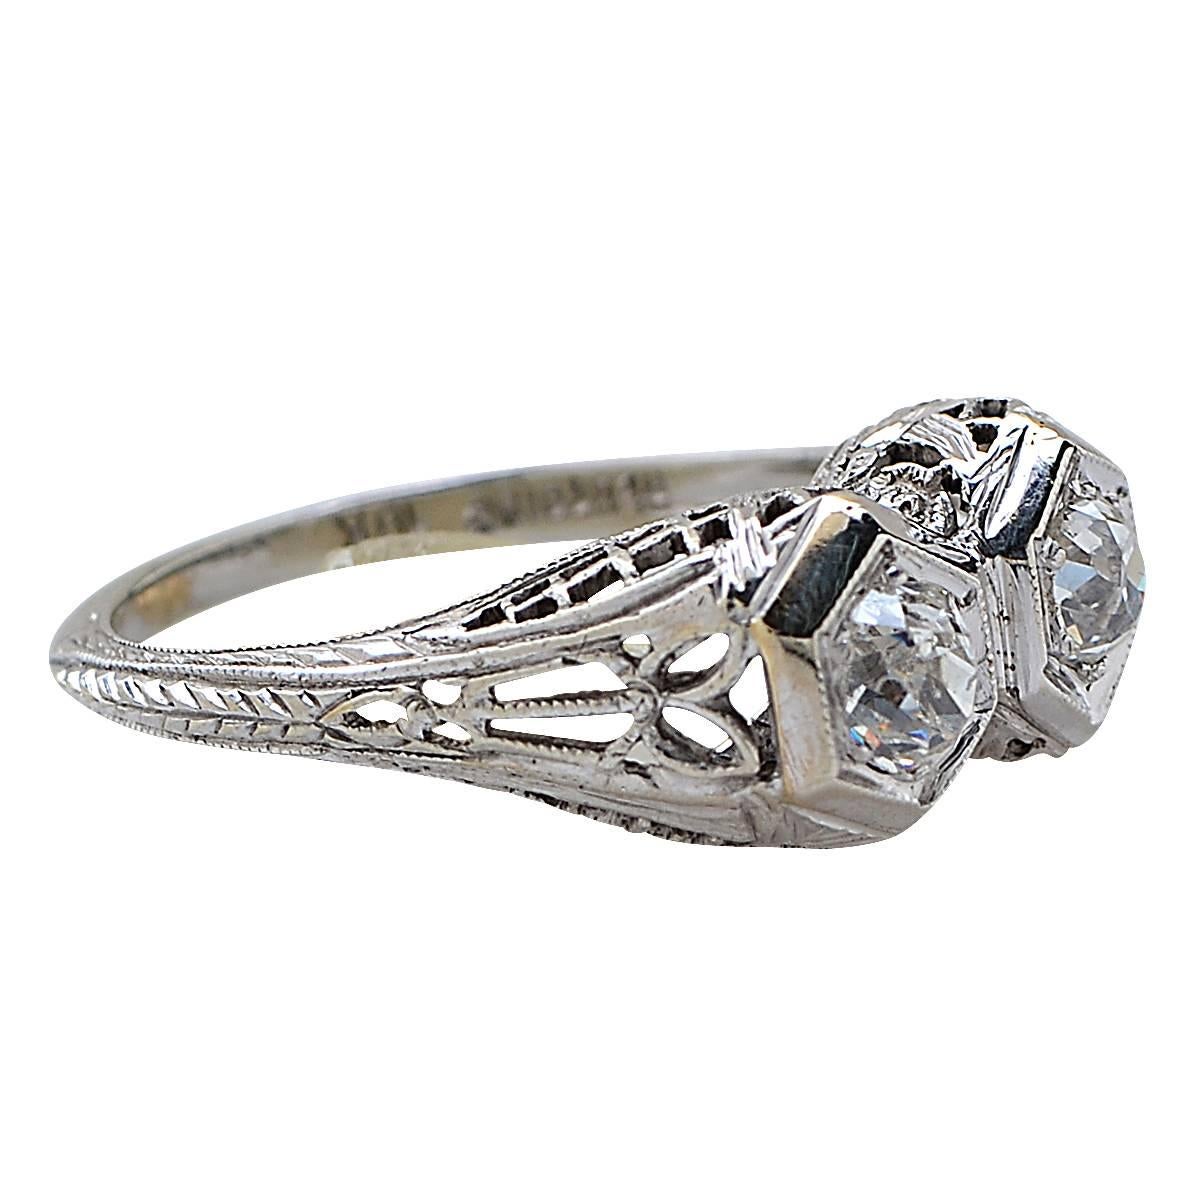 Beautiful Antique Diamond ring crafted in 18 carat white gold, showcasing 2 round brilliant cut diamonds weighing approximately .66 carats total, G color, SI clarity. This delightful ring is a size 5.25, and weighs 3.42 grams.

Our pieces are all